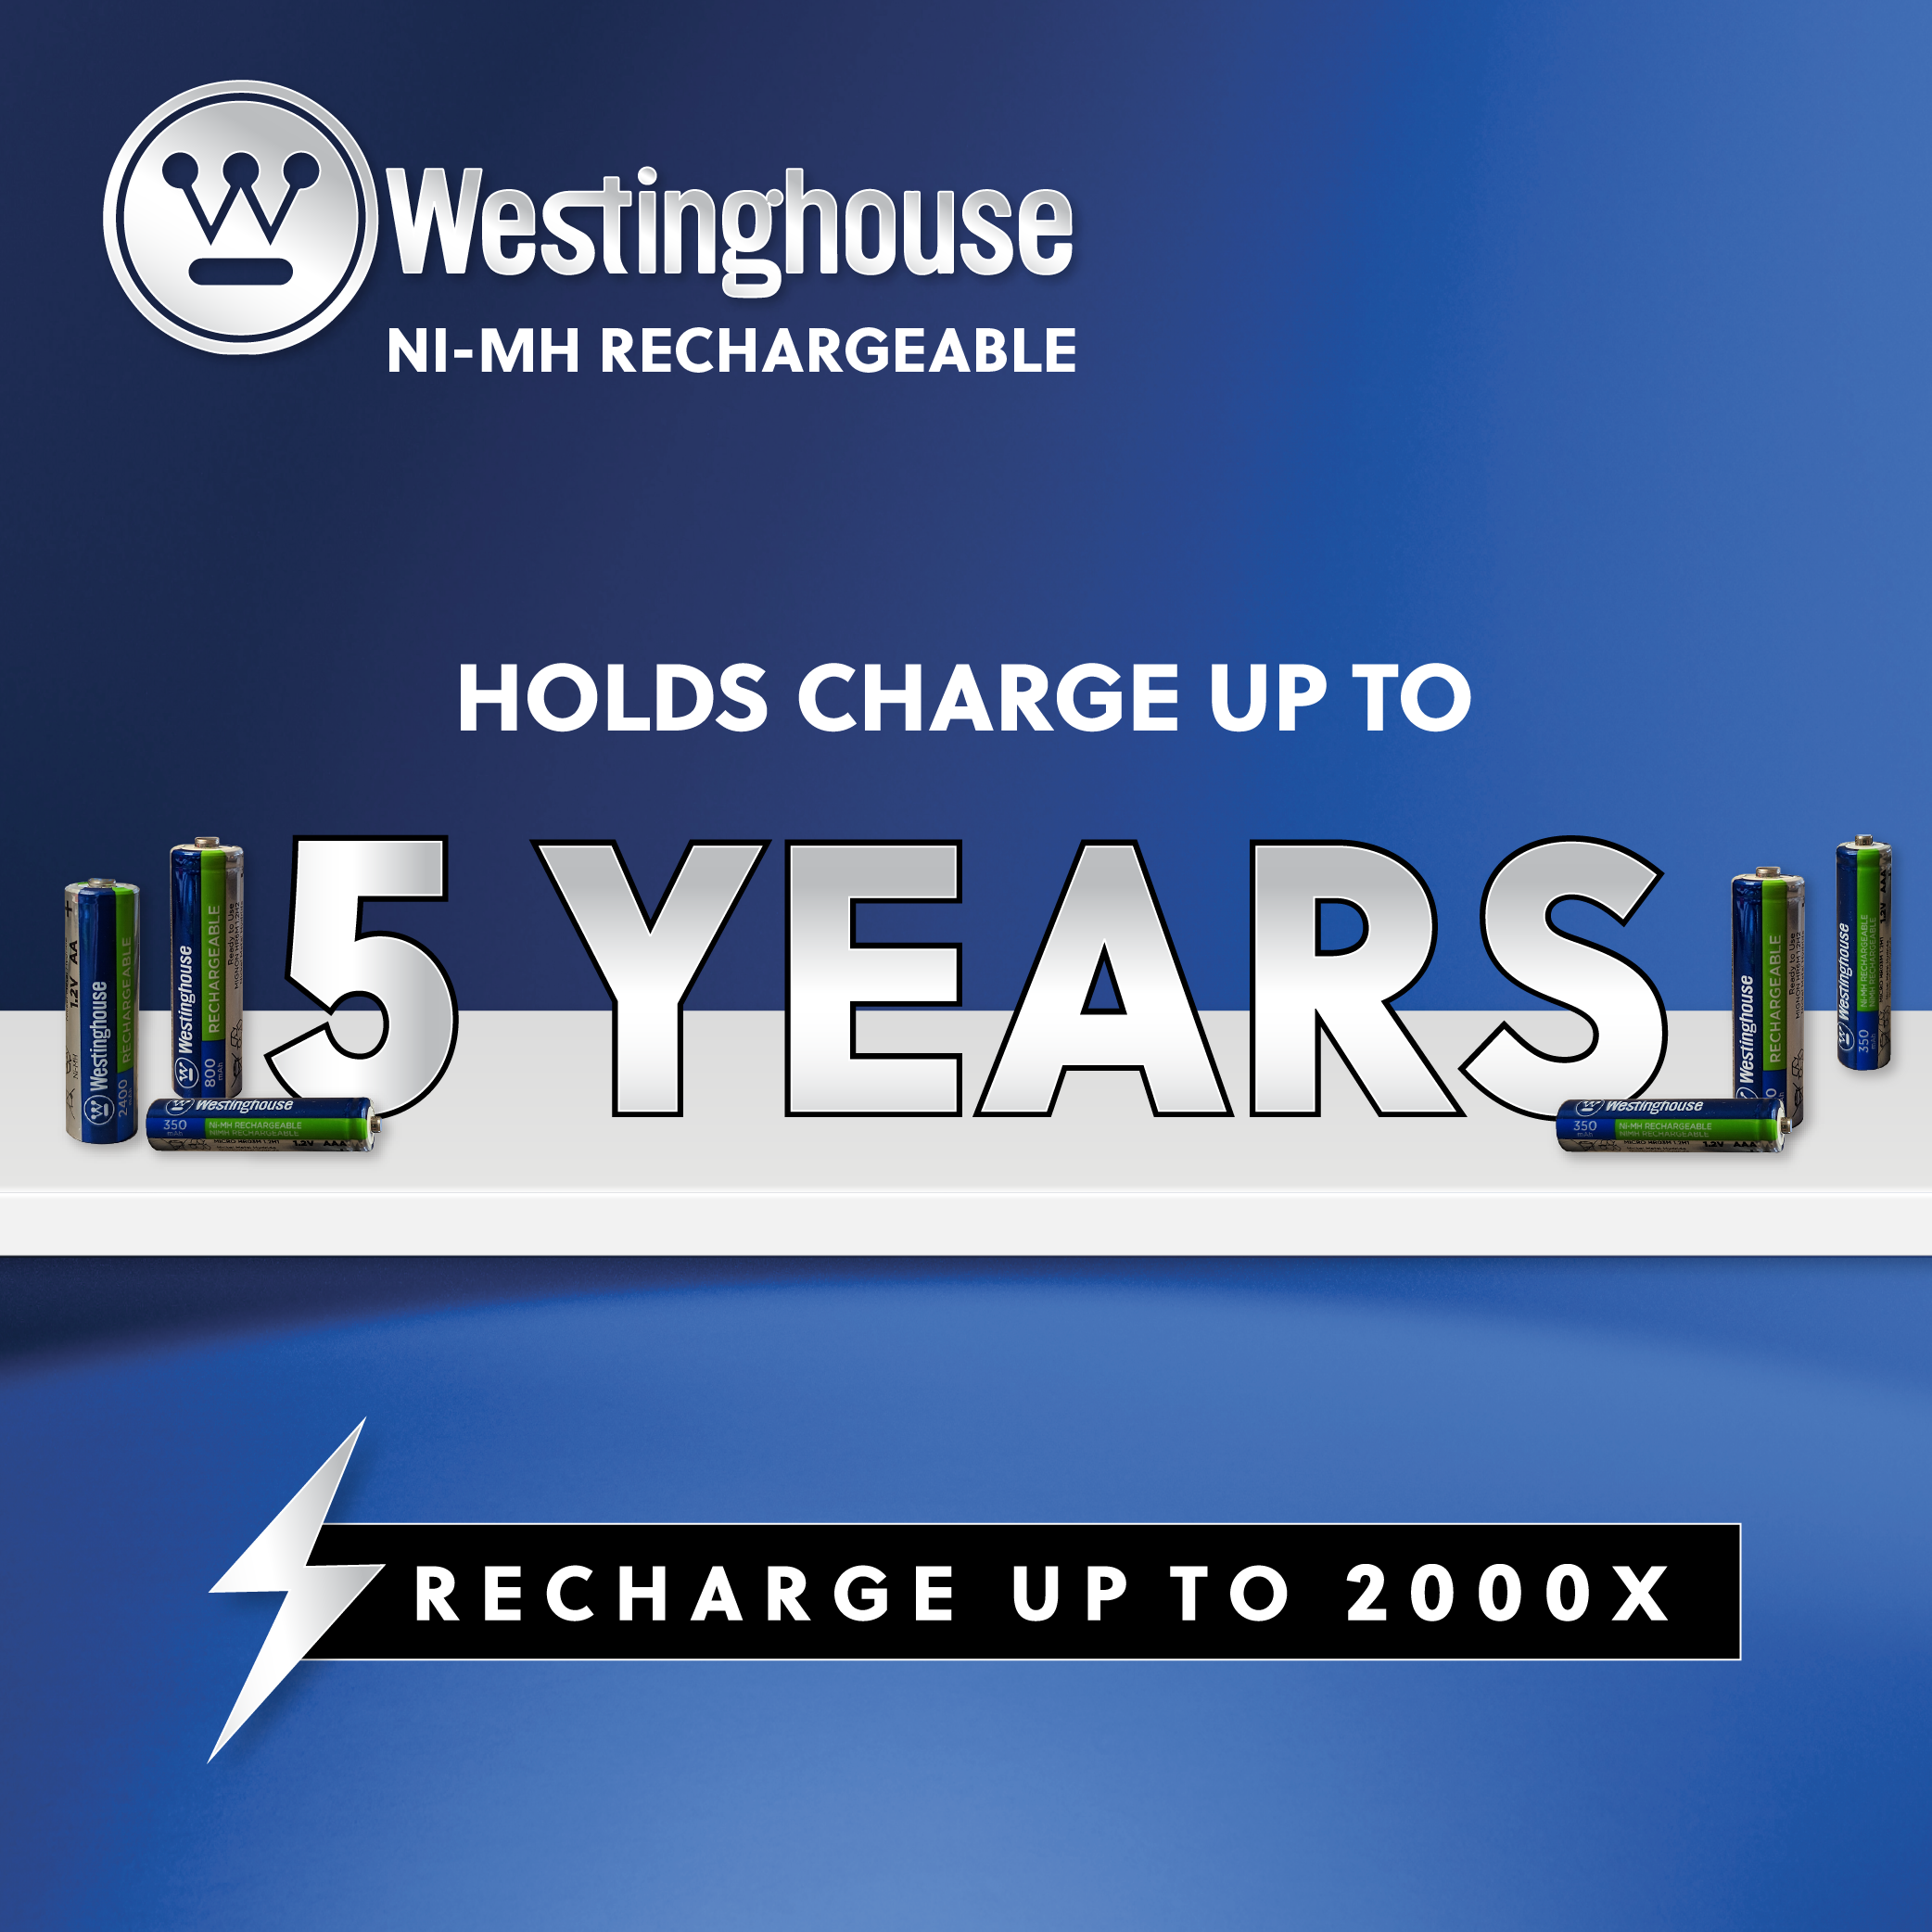 Westinghouse AAA Ni-Mh Rechargeable Batteries 350mAh Blister Pack of 4